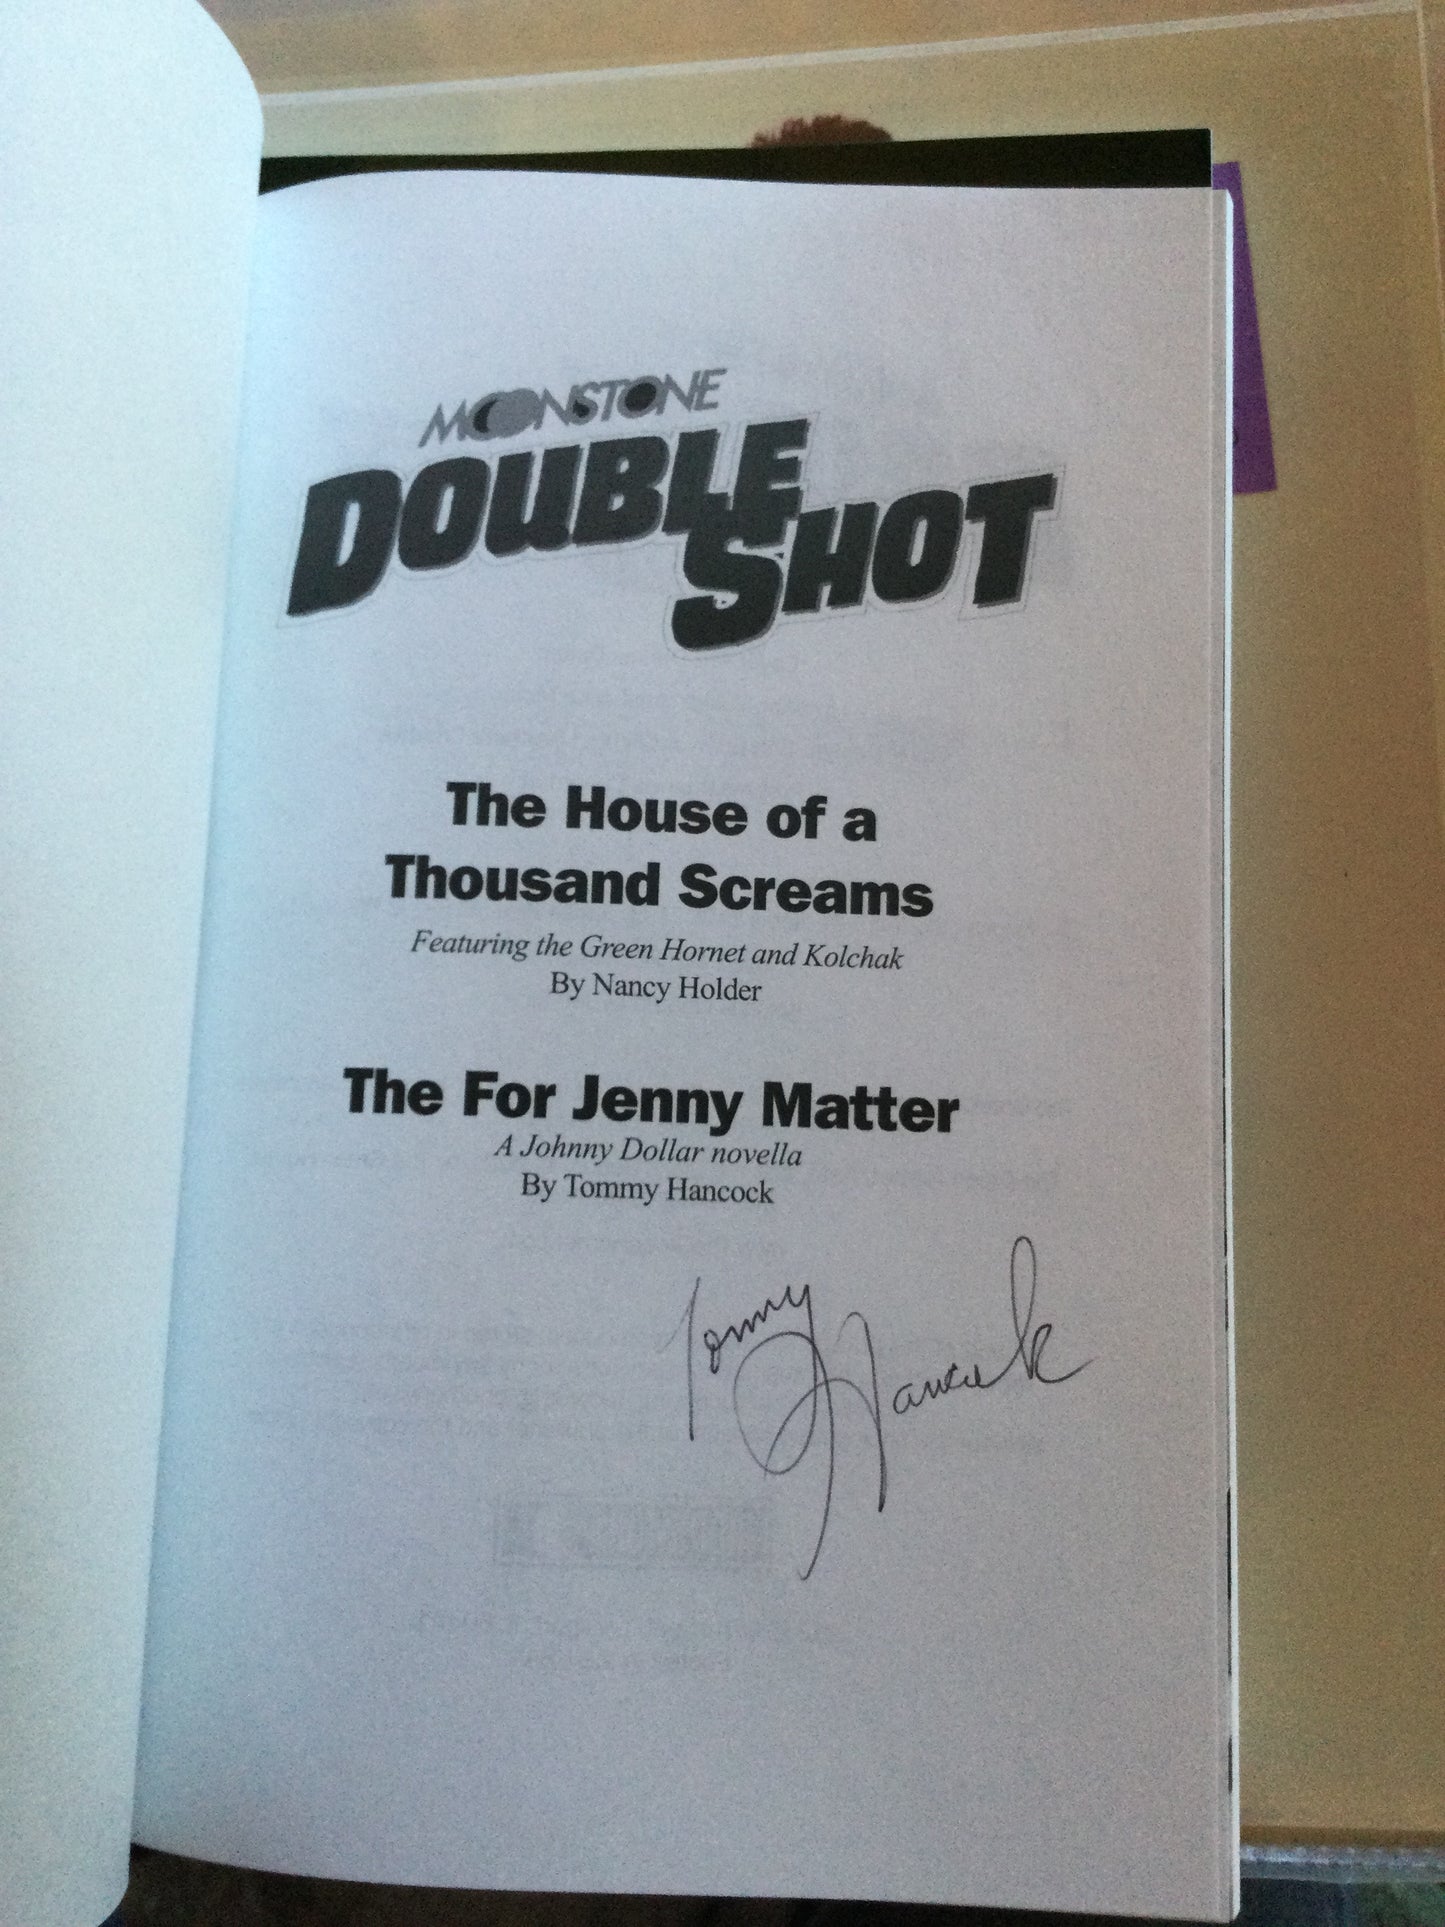 THE GREEN HORNET, book, Tommy Hancock, autograph